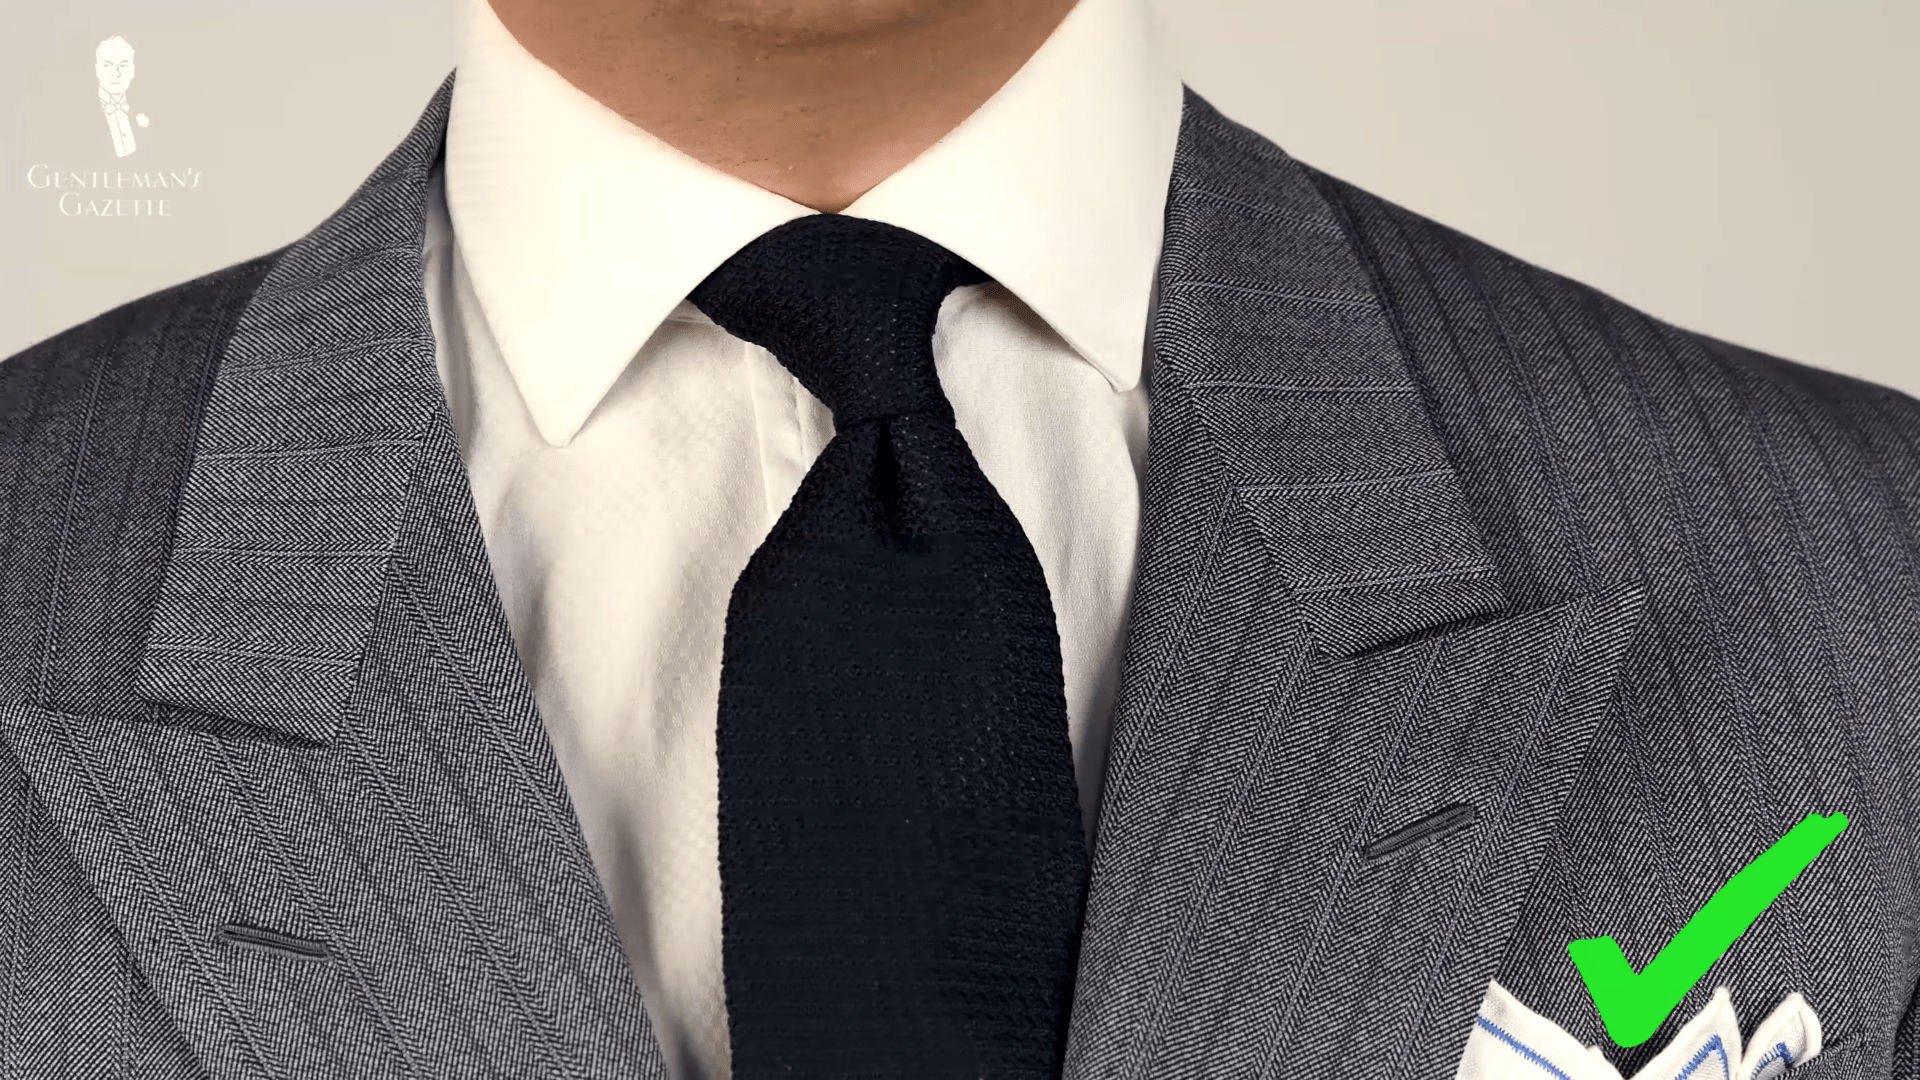 How To Pair Shirts & Ties With Gray Suits - A Guide To Wearing Grey